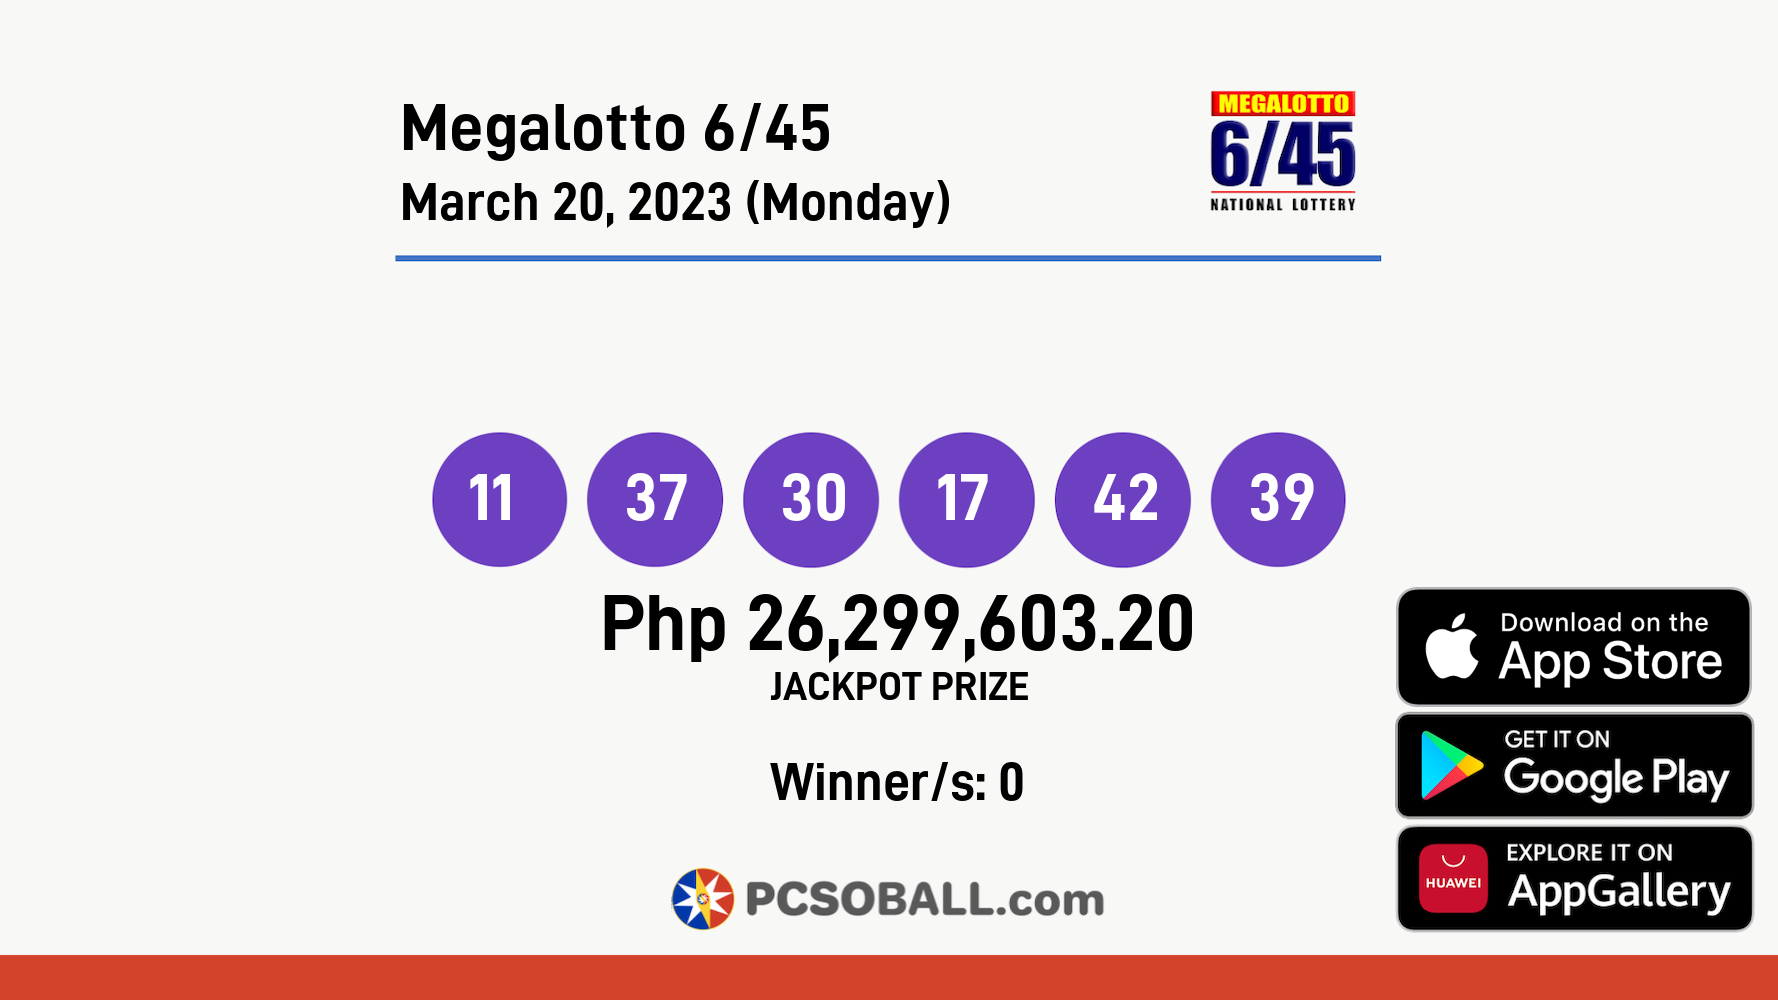 Megalotto 6/45 March 20, 2023 (Monday) Result